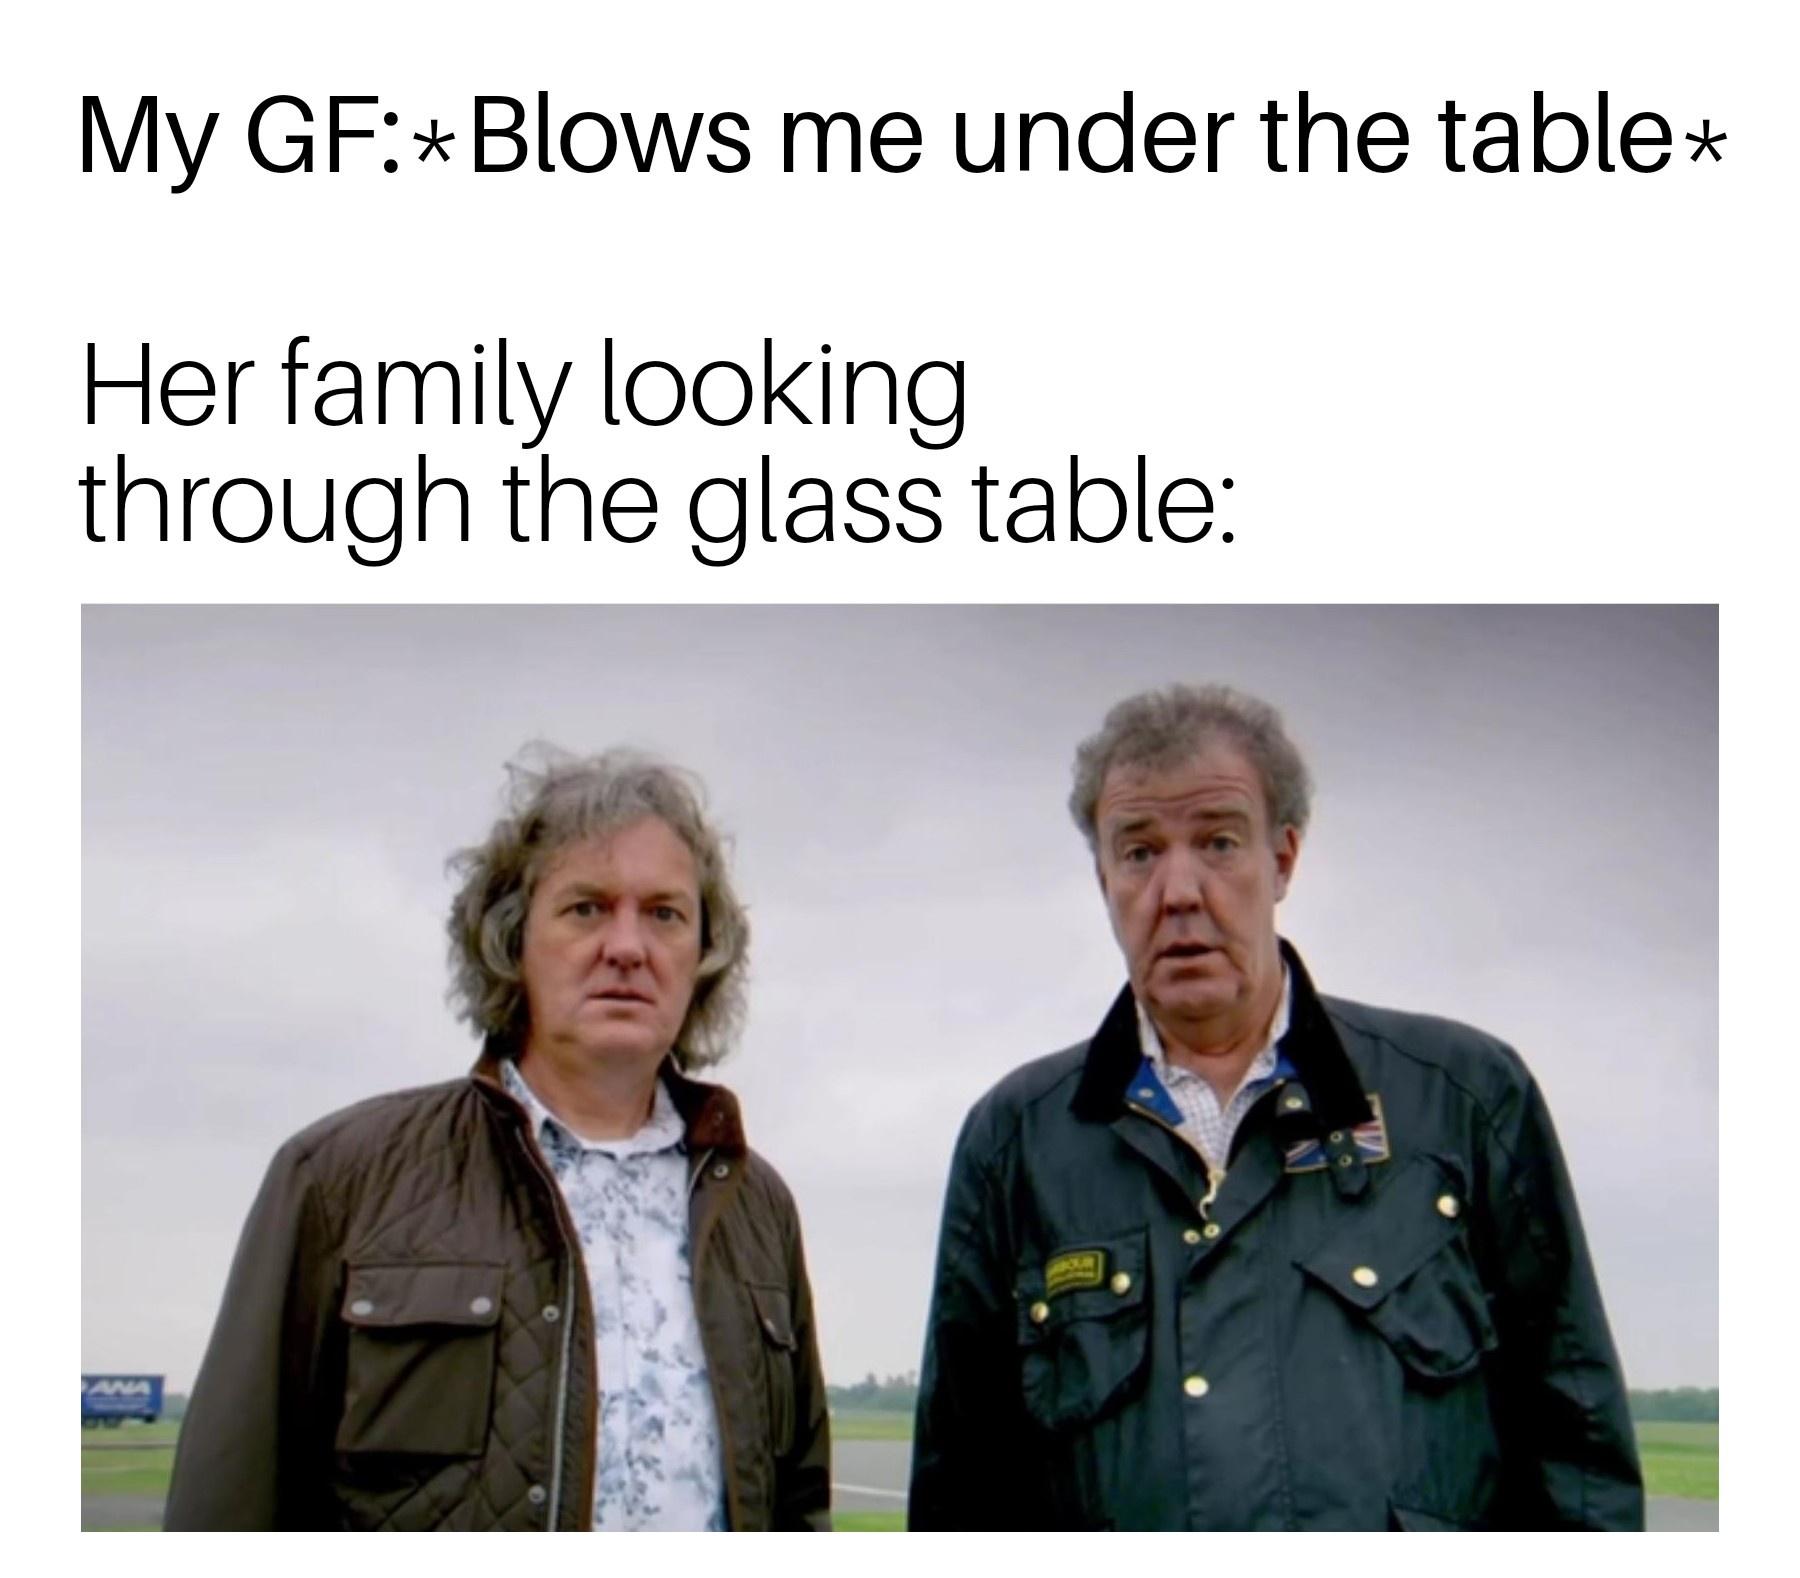 top gear wtf - My Gf Blows me under the table Her family looking through the glass table